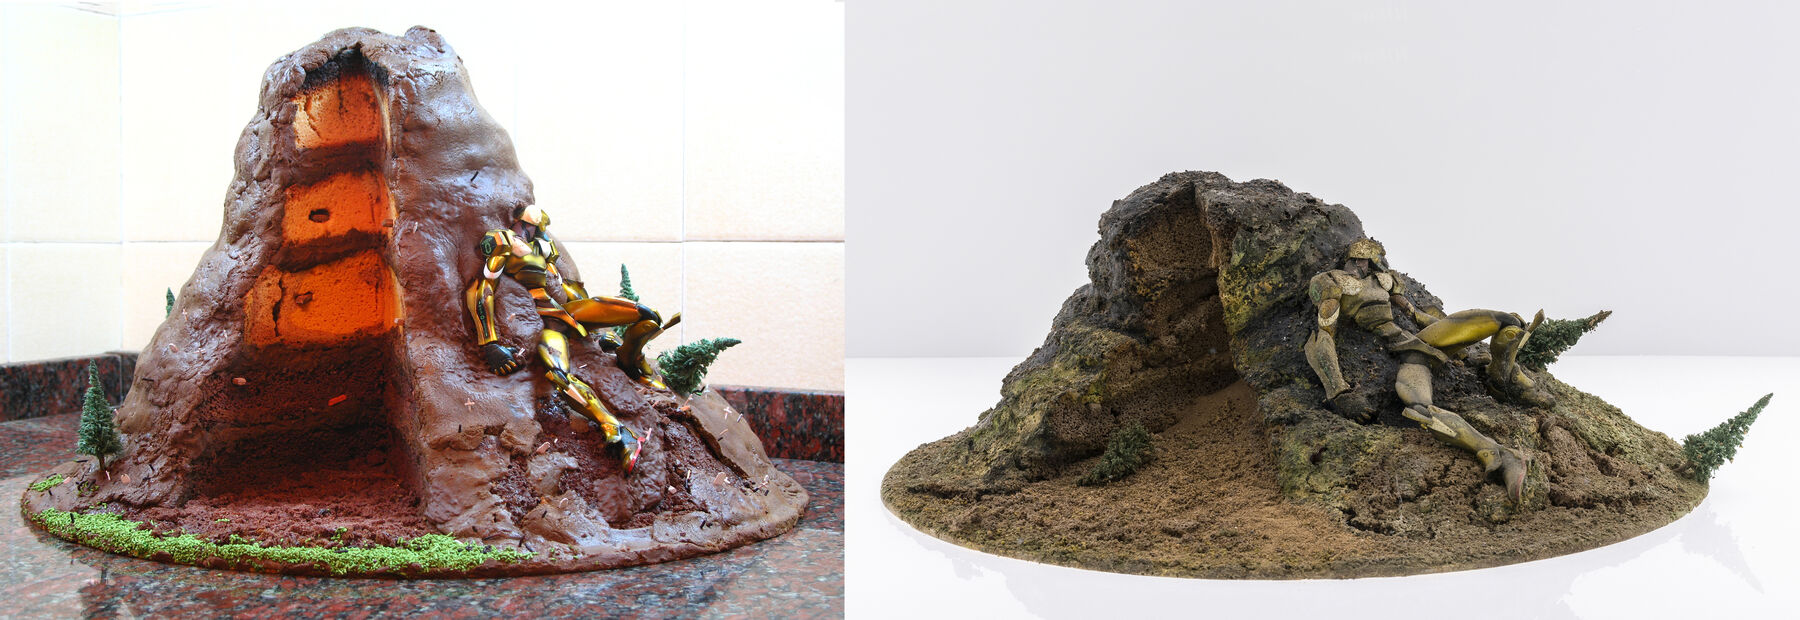 Split-view of figure laying on model-hill-scape: left, smooth interior cross-section glows red, right, crumbly, shorter hill in earthy tones